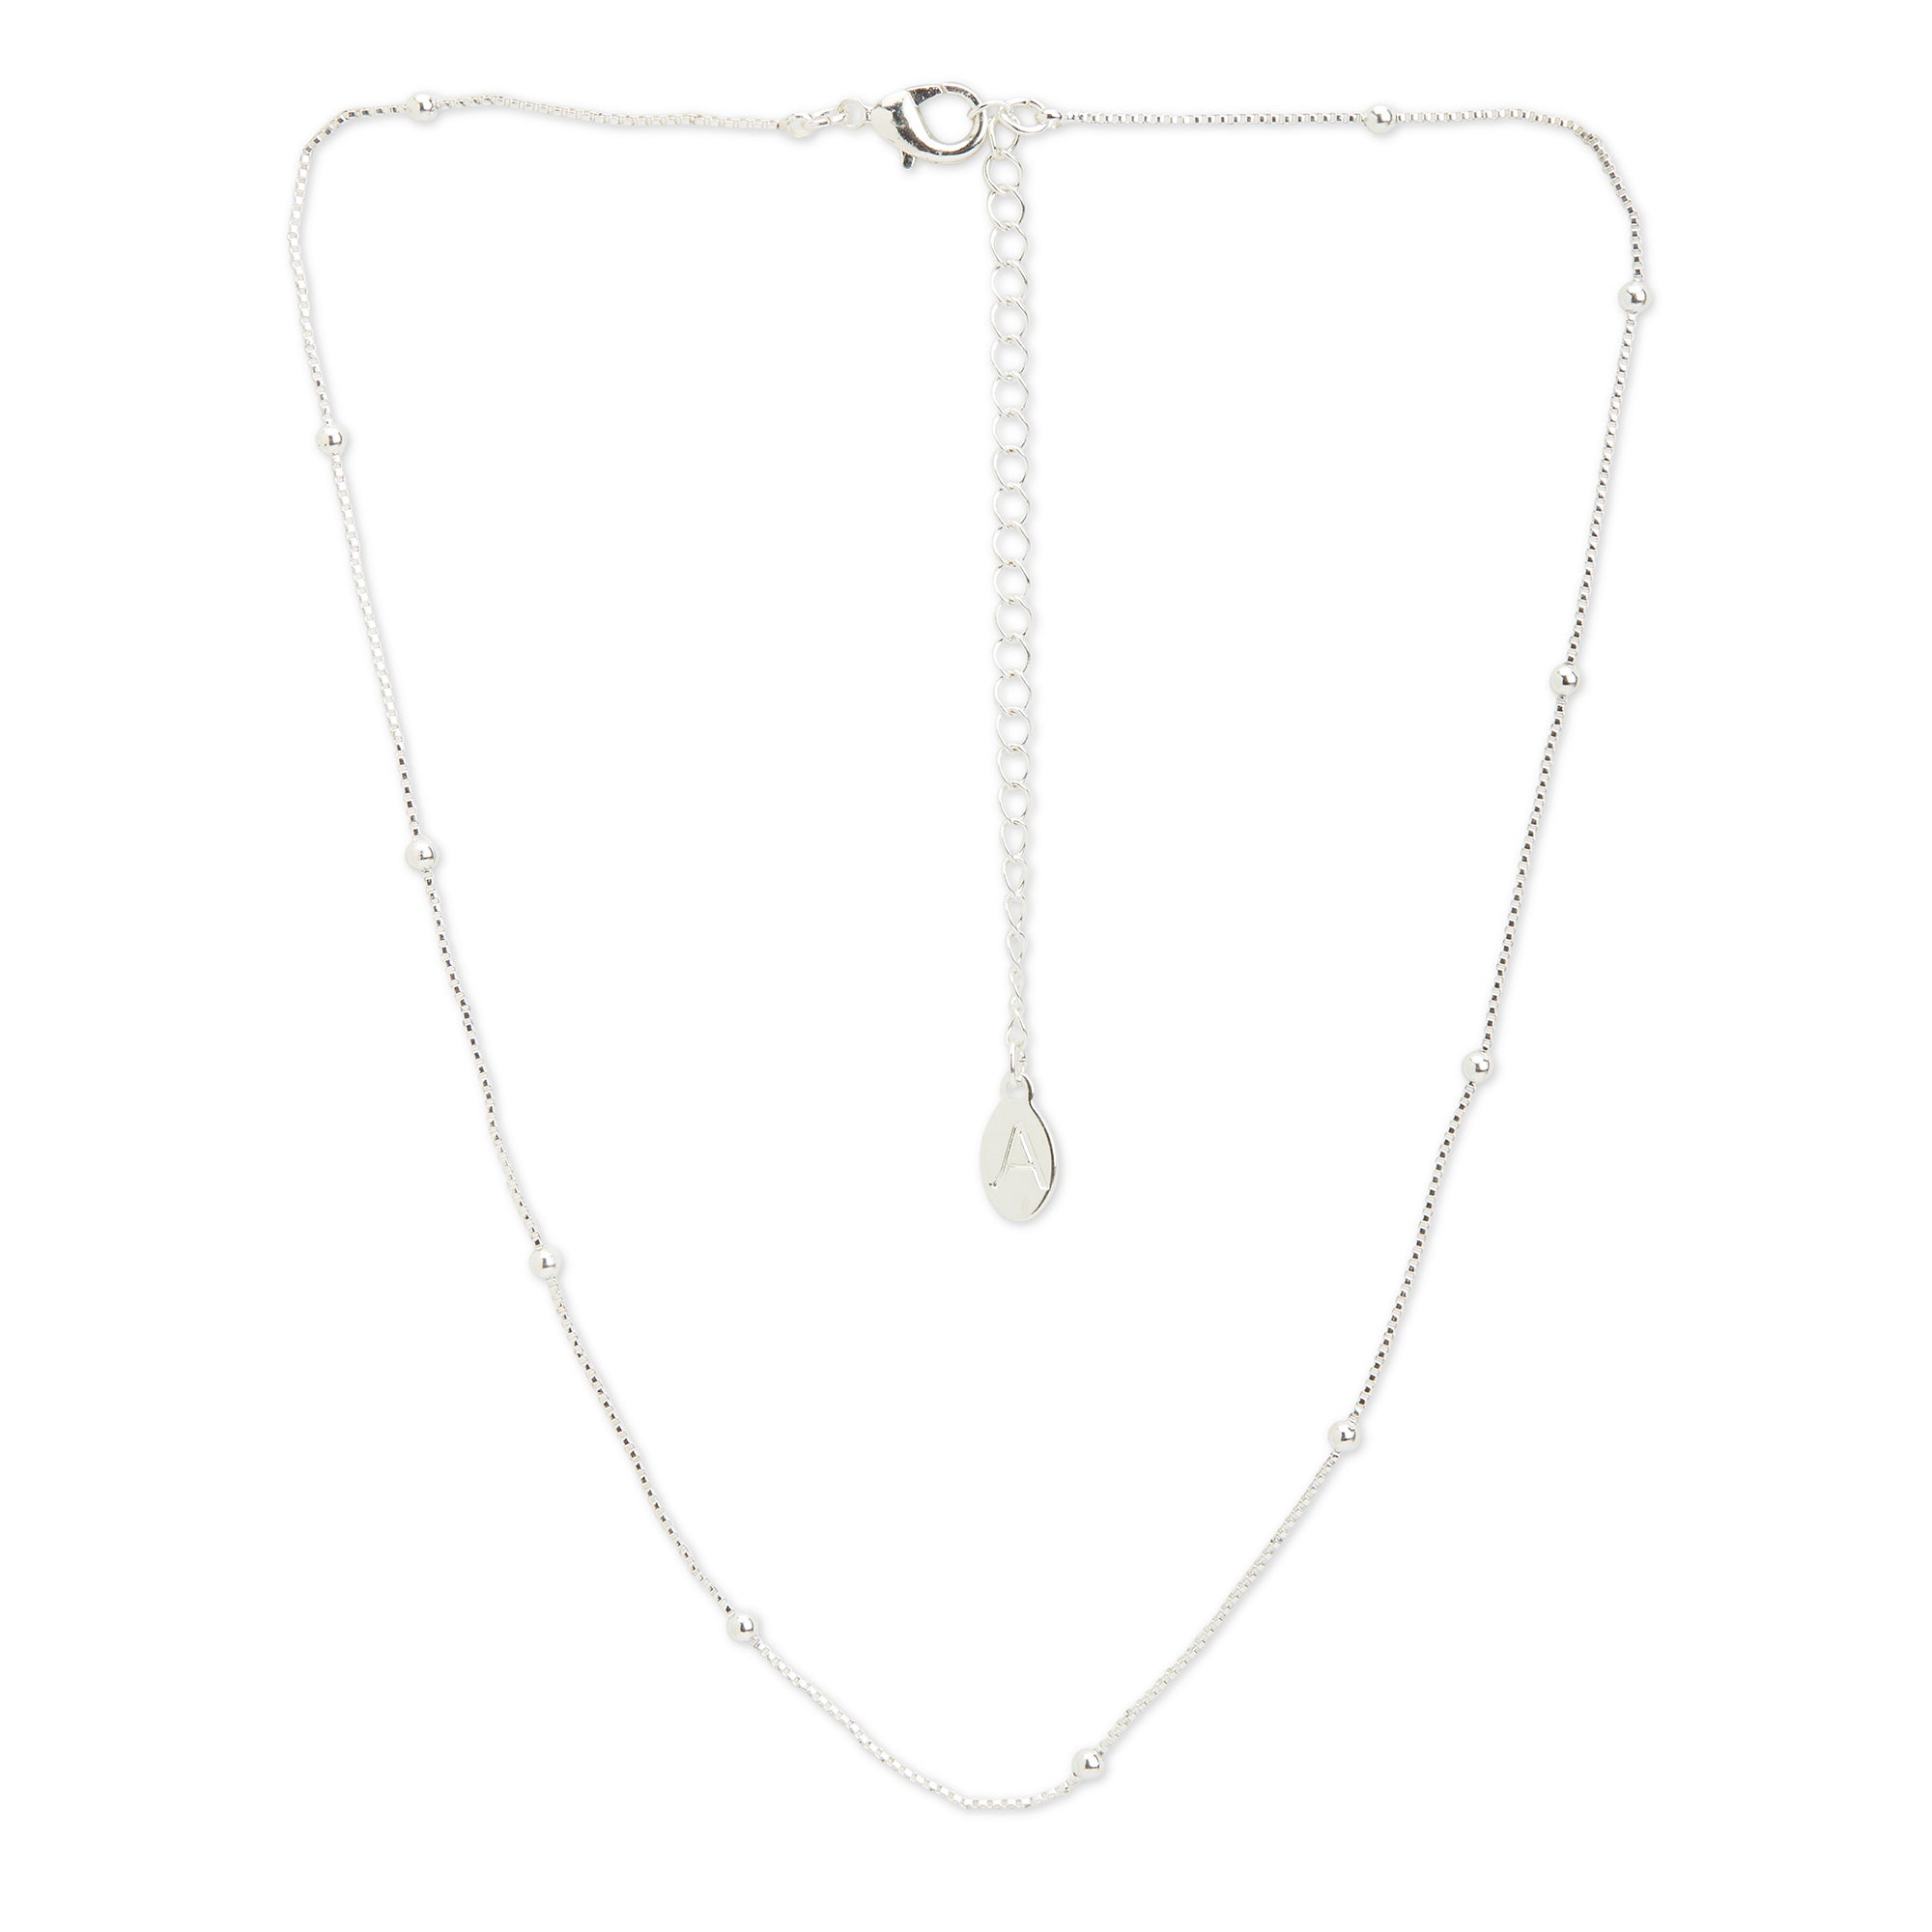 Accessorize London Women's Silver Beaded Chain Necklace